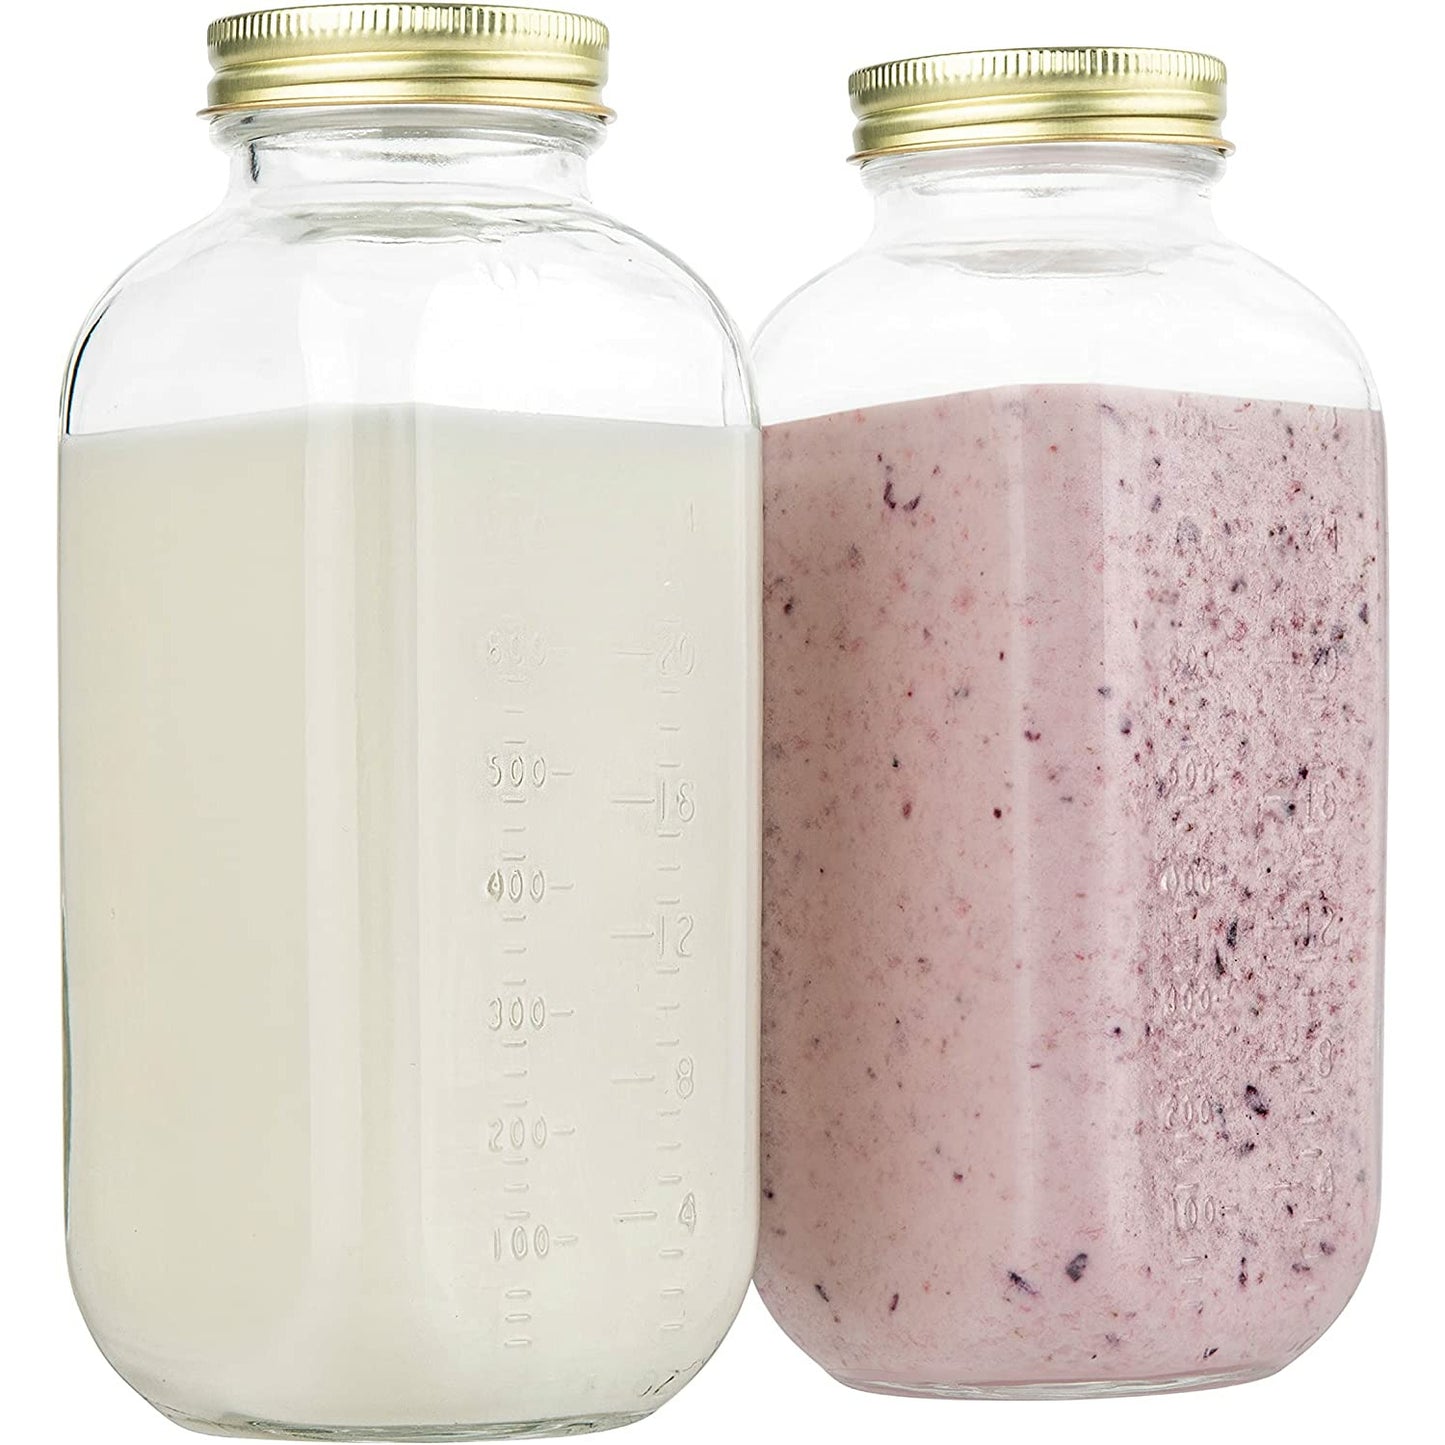 Kitchentoolz 32 oz Round Glass Milk Bottle Carafe with Lids & Pour Spout Made in USA 2 Pack, Size: 32 Ounce, Clear